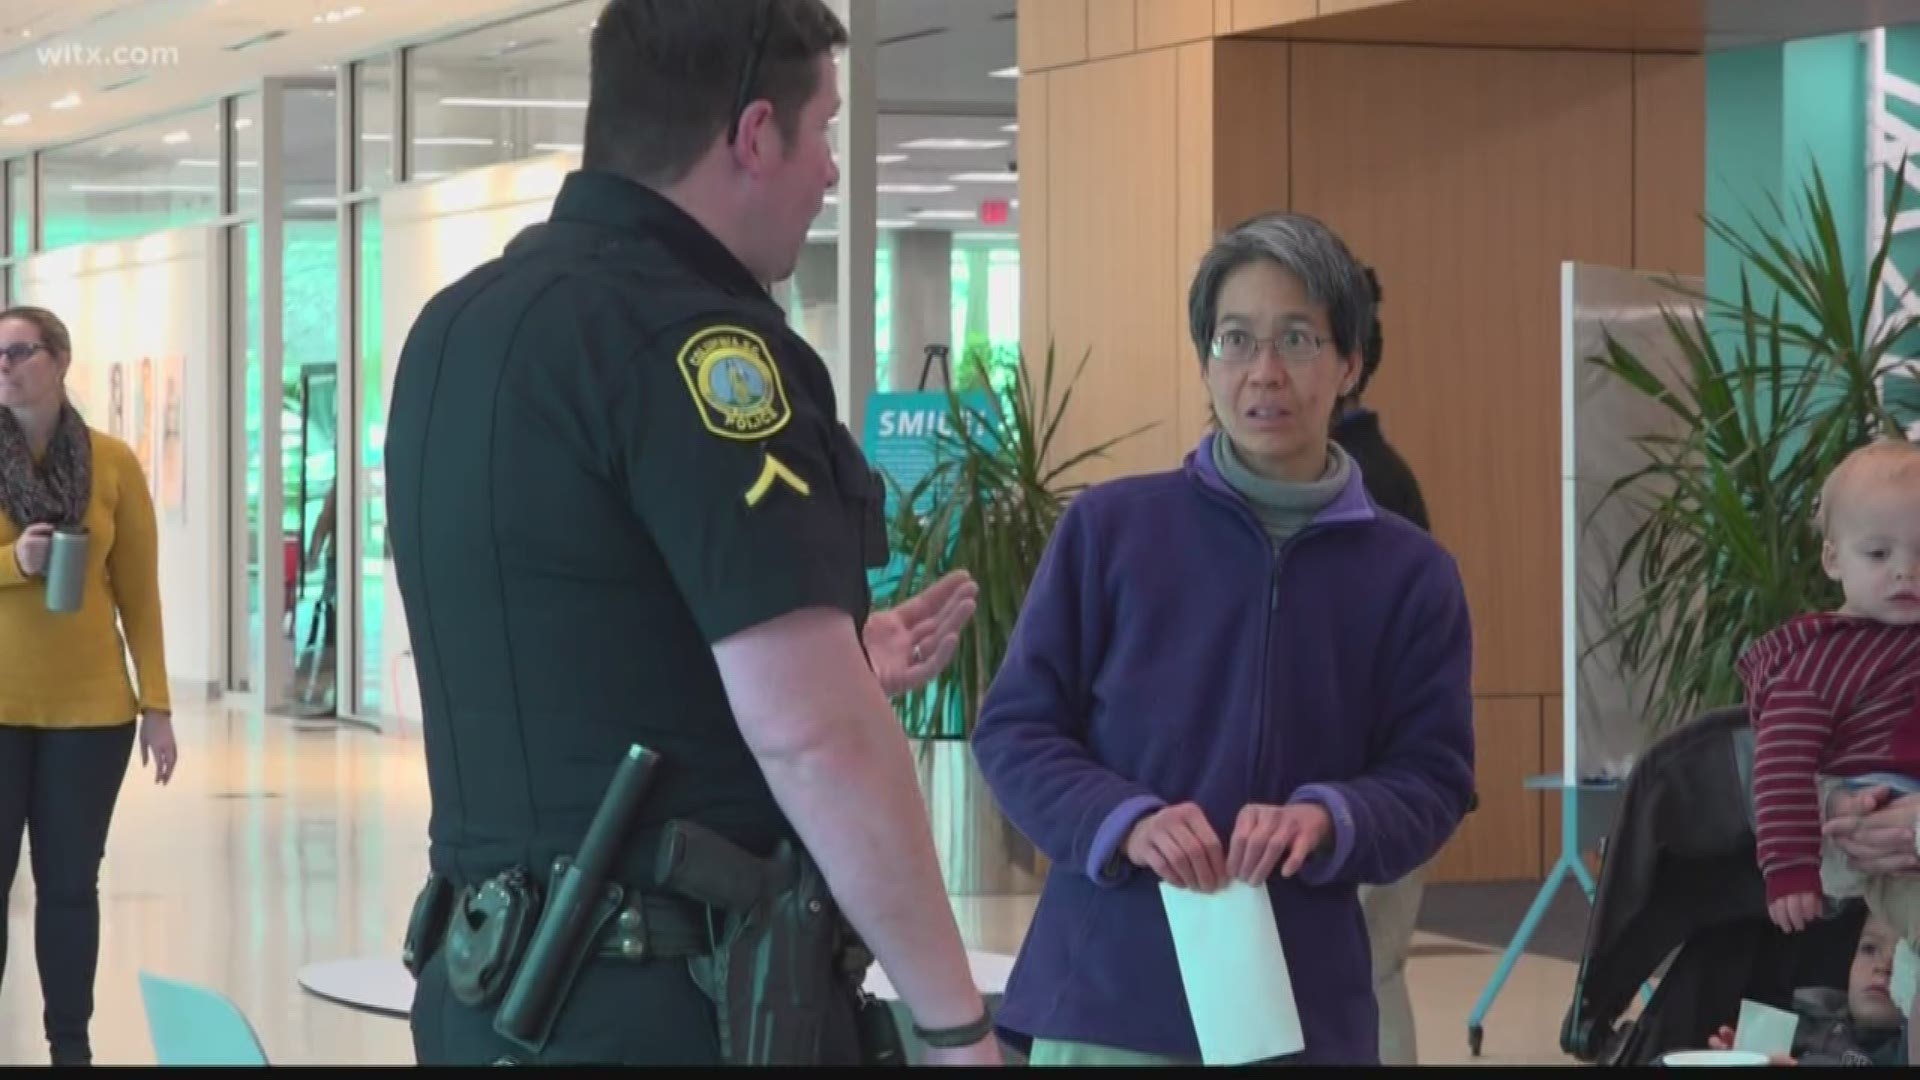 People had a chance to meet with Columbia Police officers, ask questions and voice concerns over a cup of hot chocolate at the Richland Library